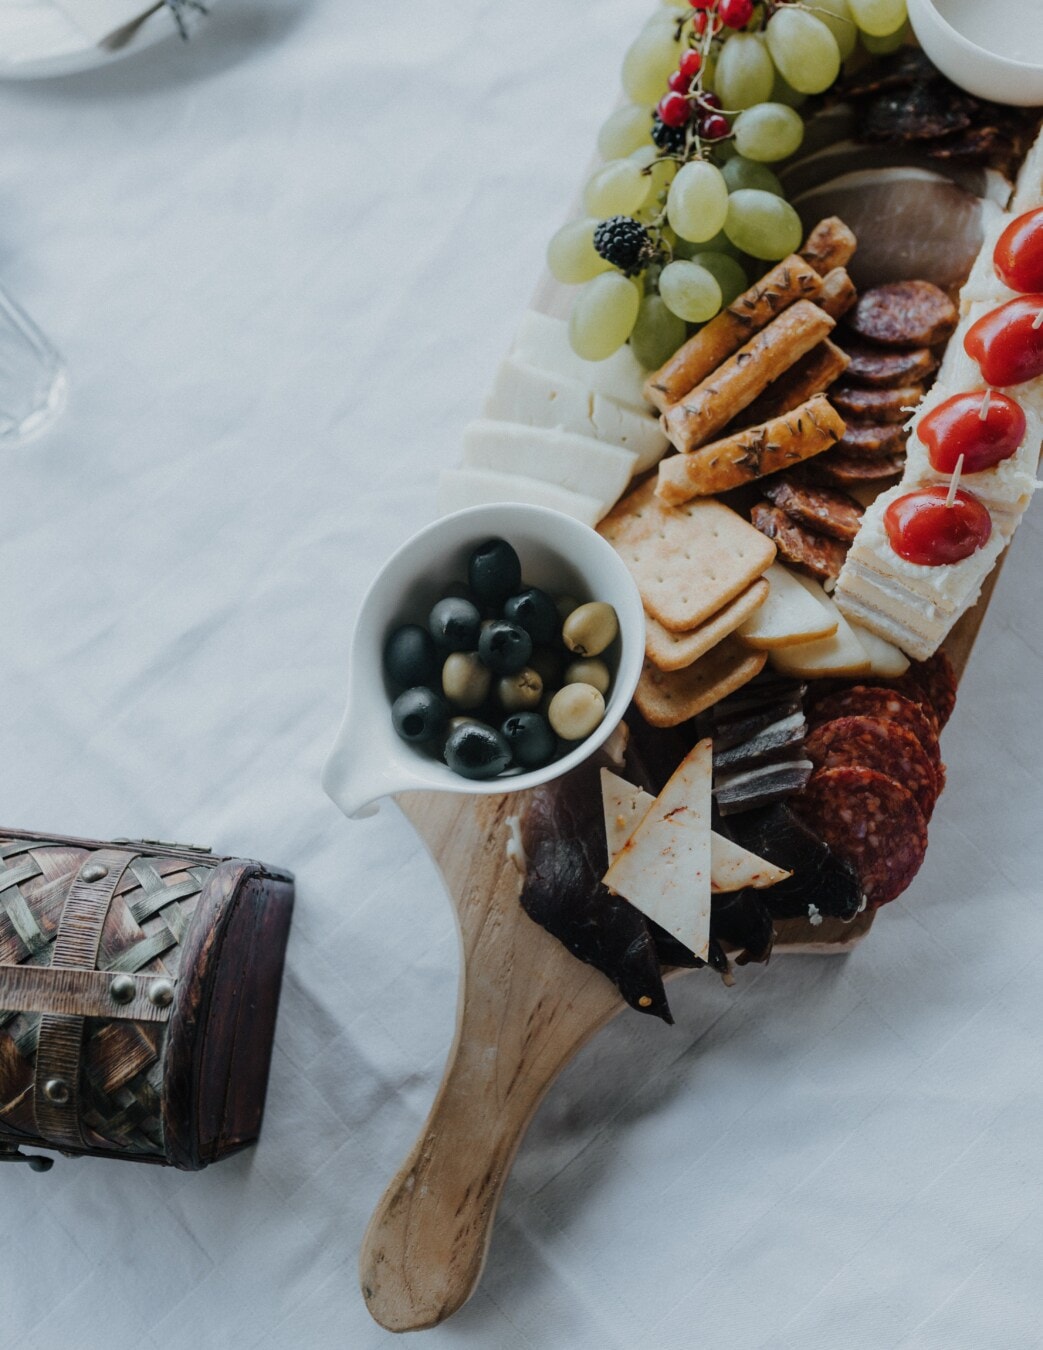 olive, grapes, food, fruit, snack, sausage, appetizer, cheese, baked goods, still life